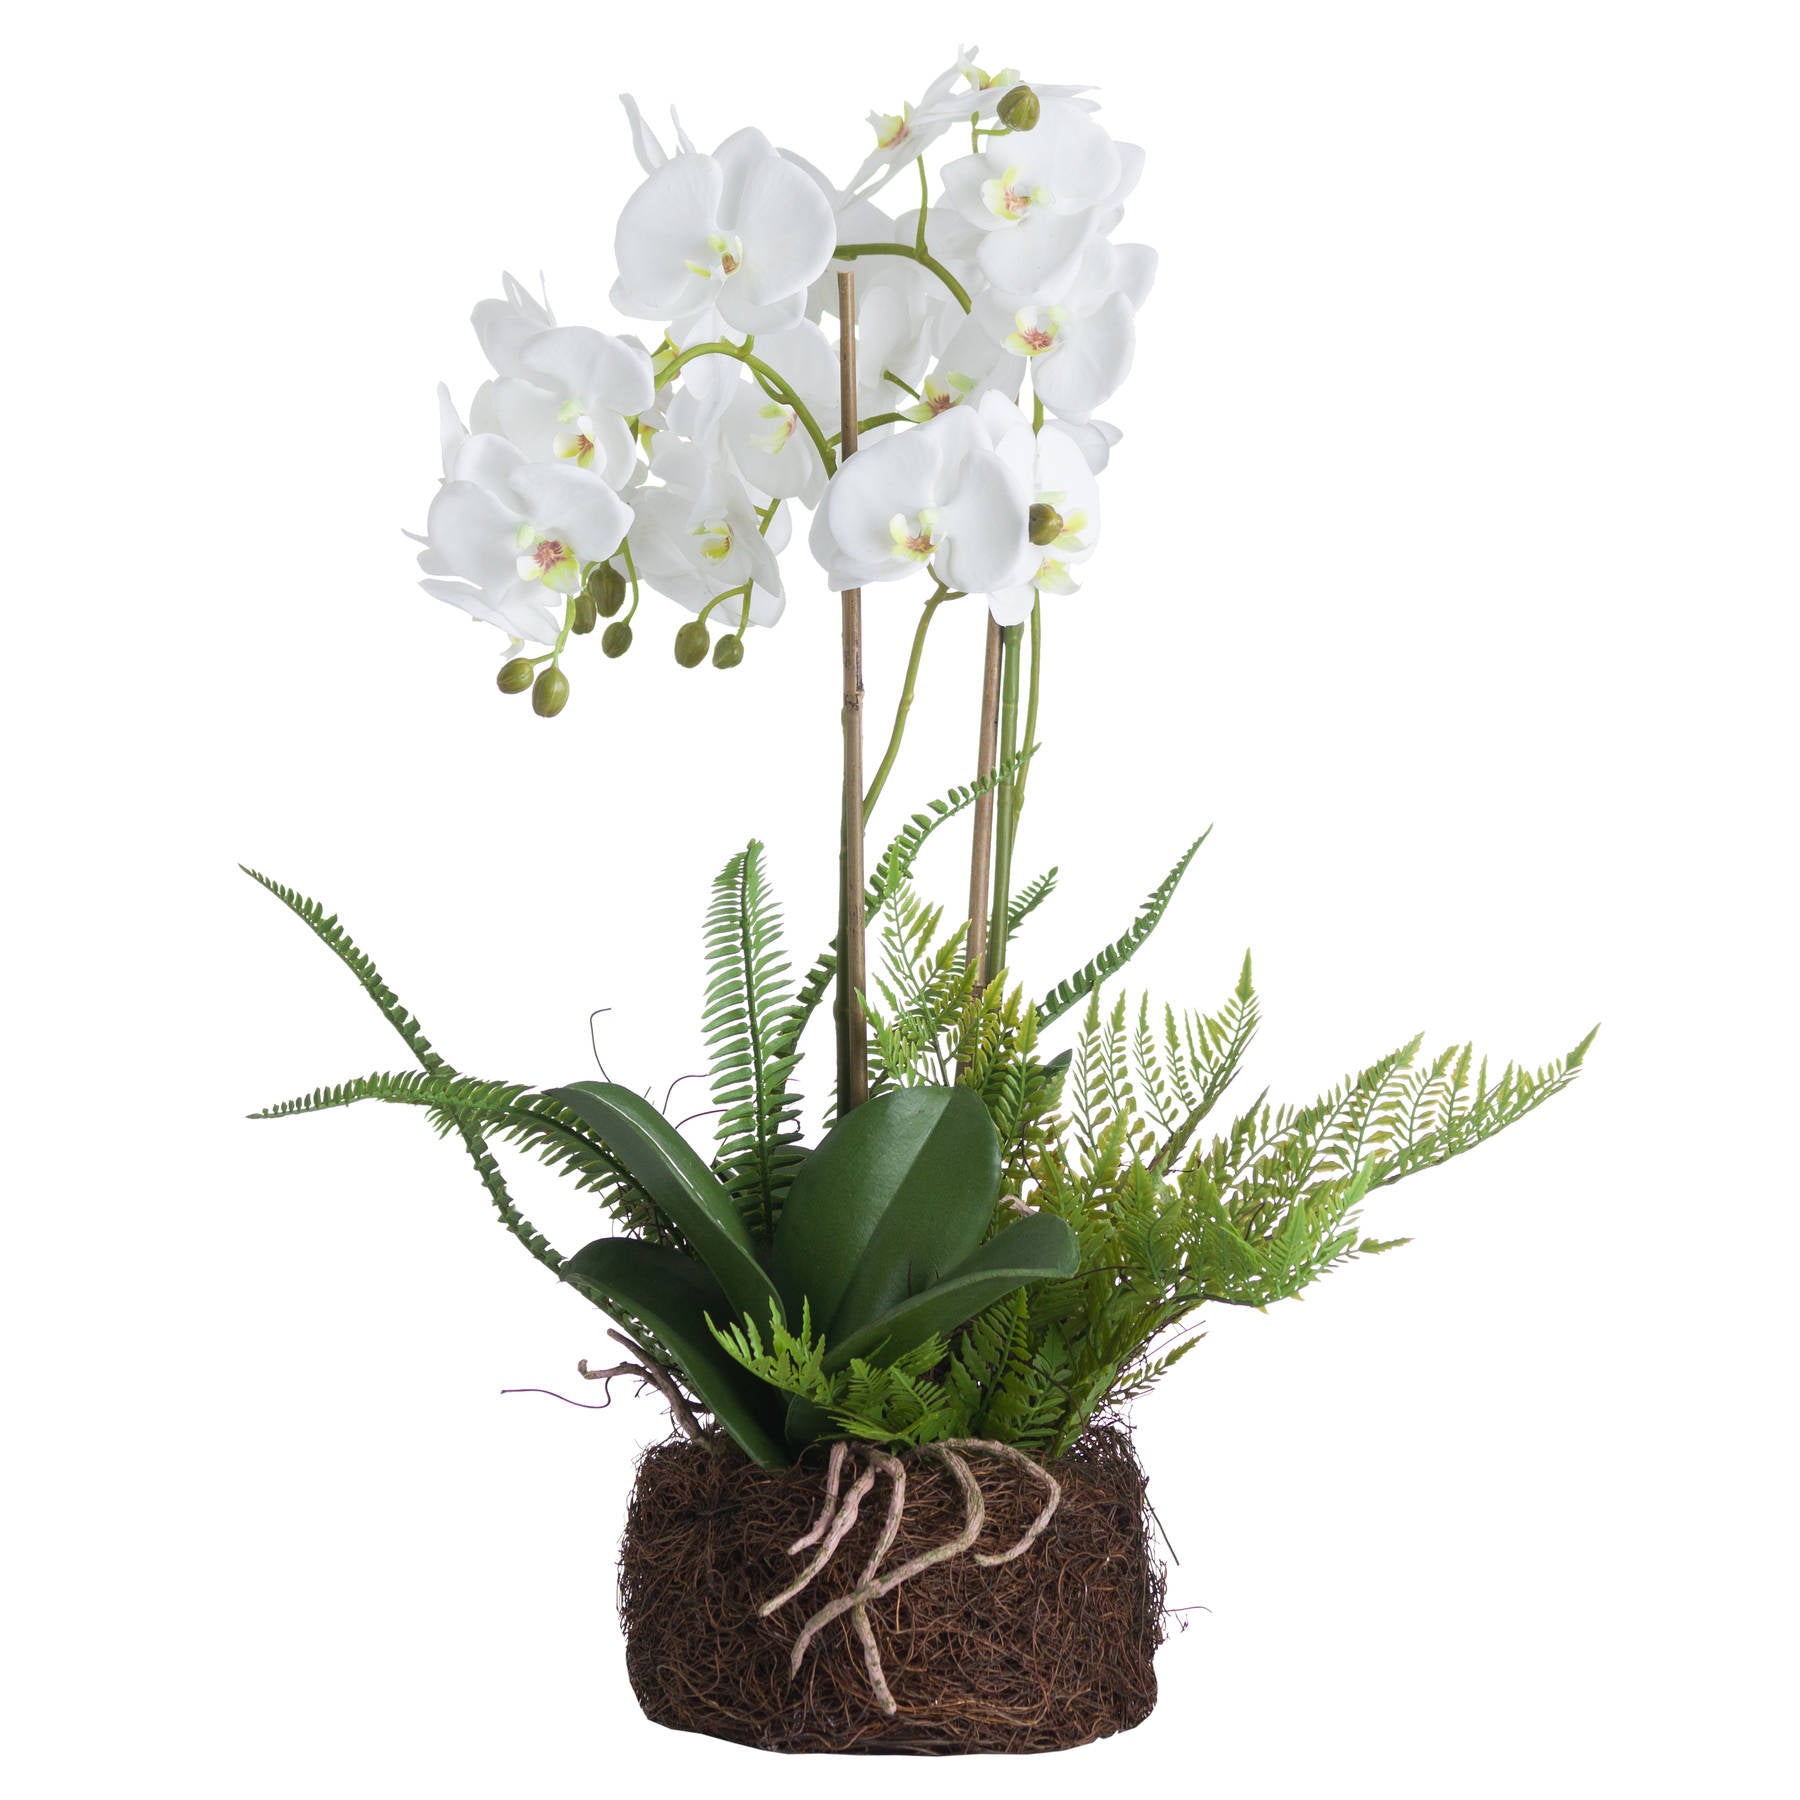 Large White Orchid And Fern Garden In Rootball